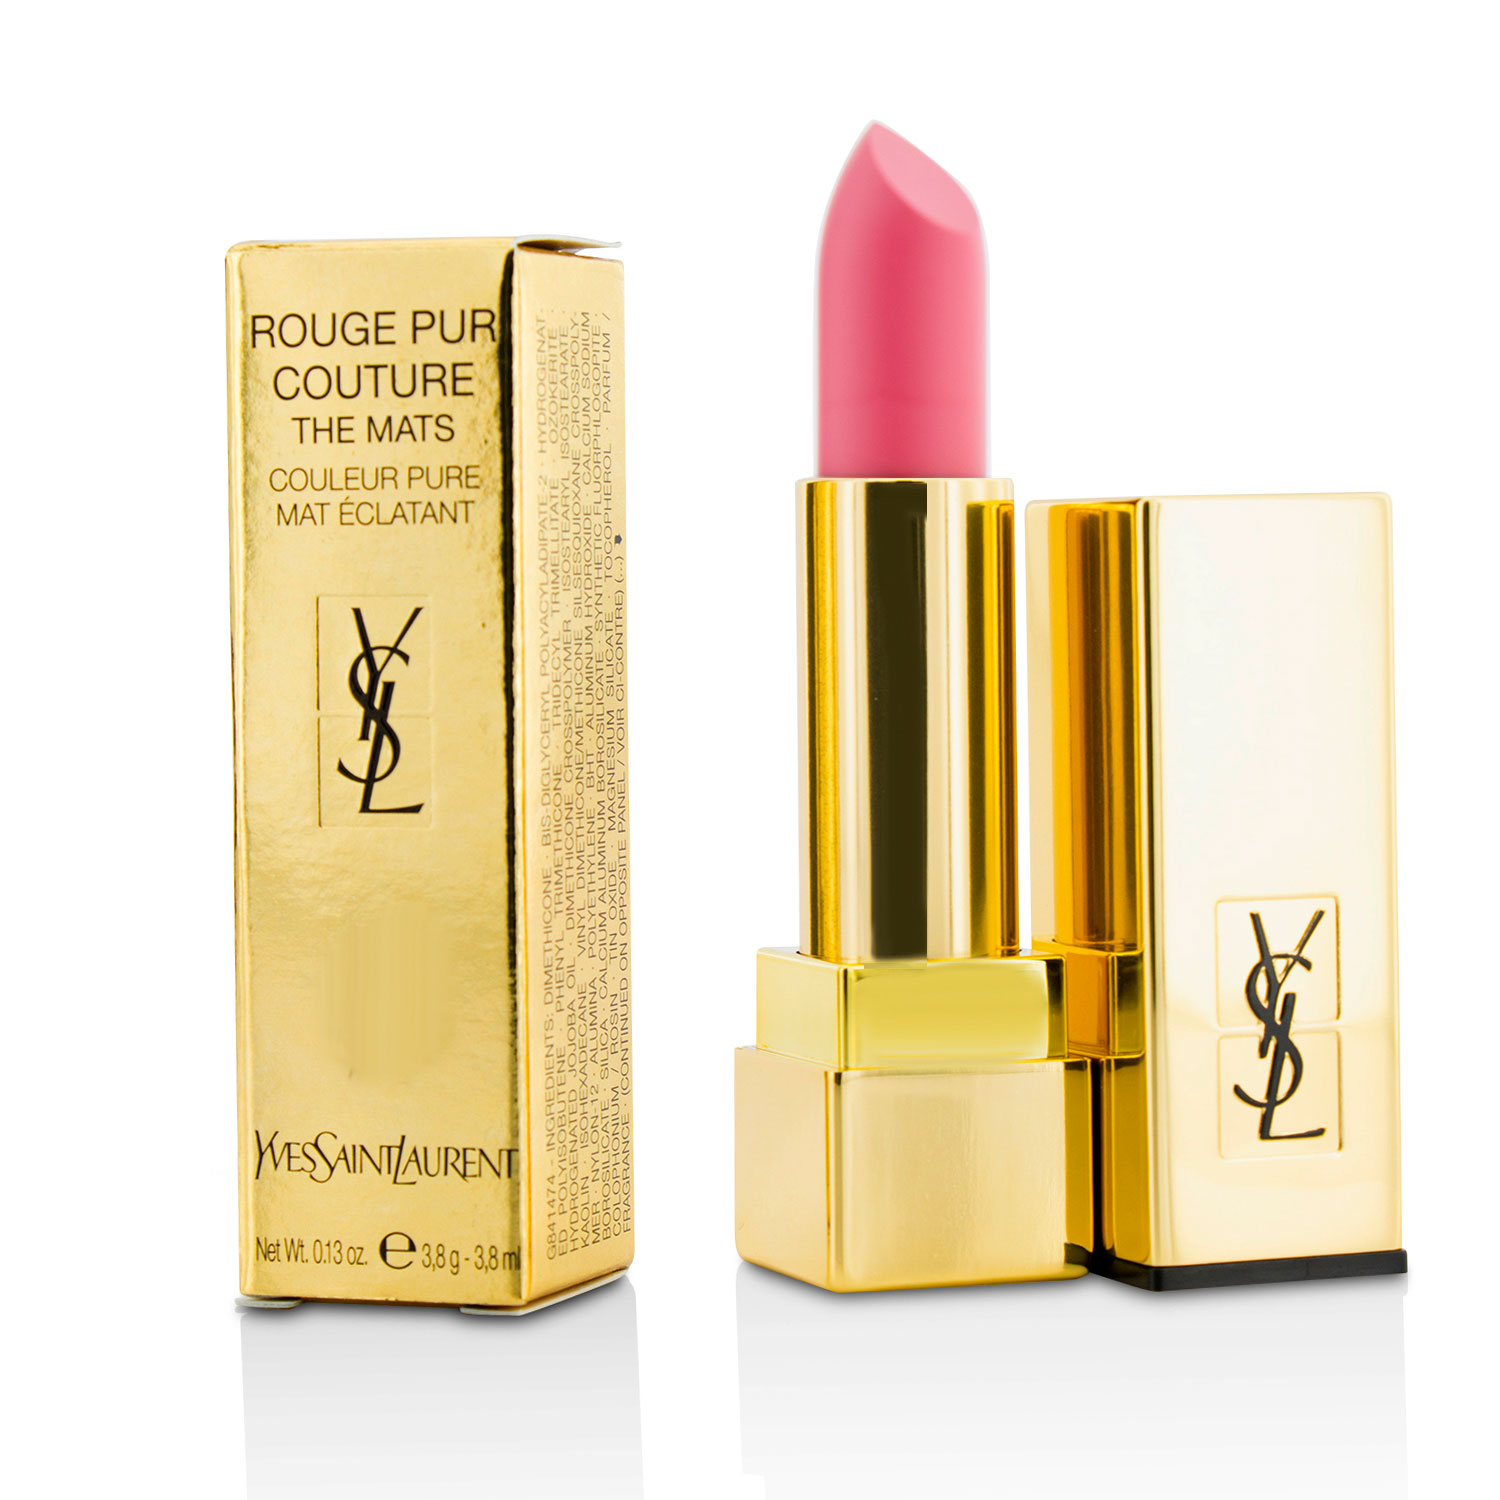 Rouge Pur Couture The Mats - # 224 Rose Illicite Yves Saint Laurent Image